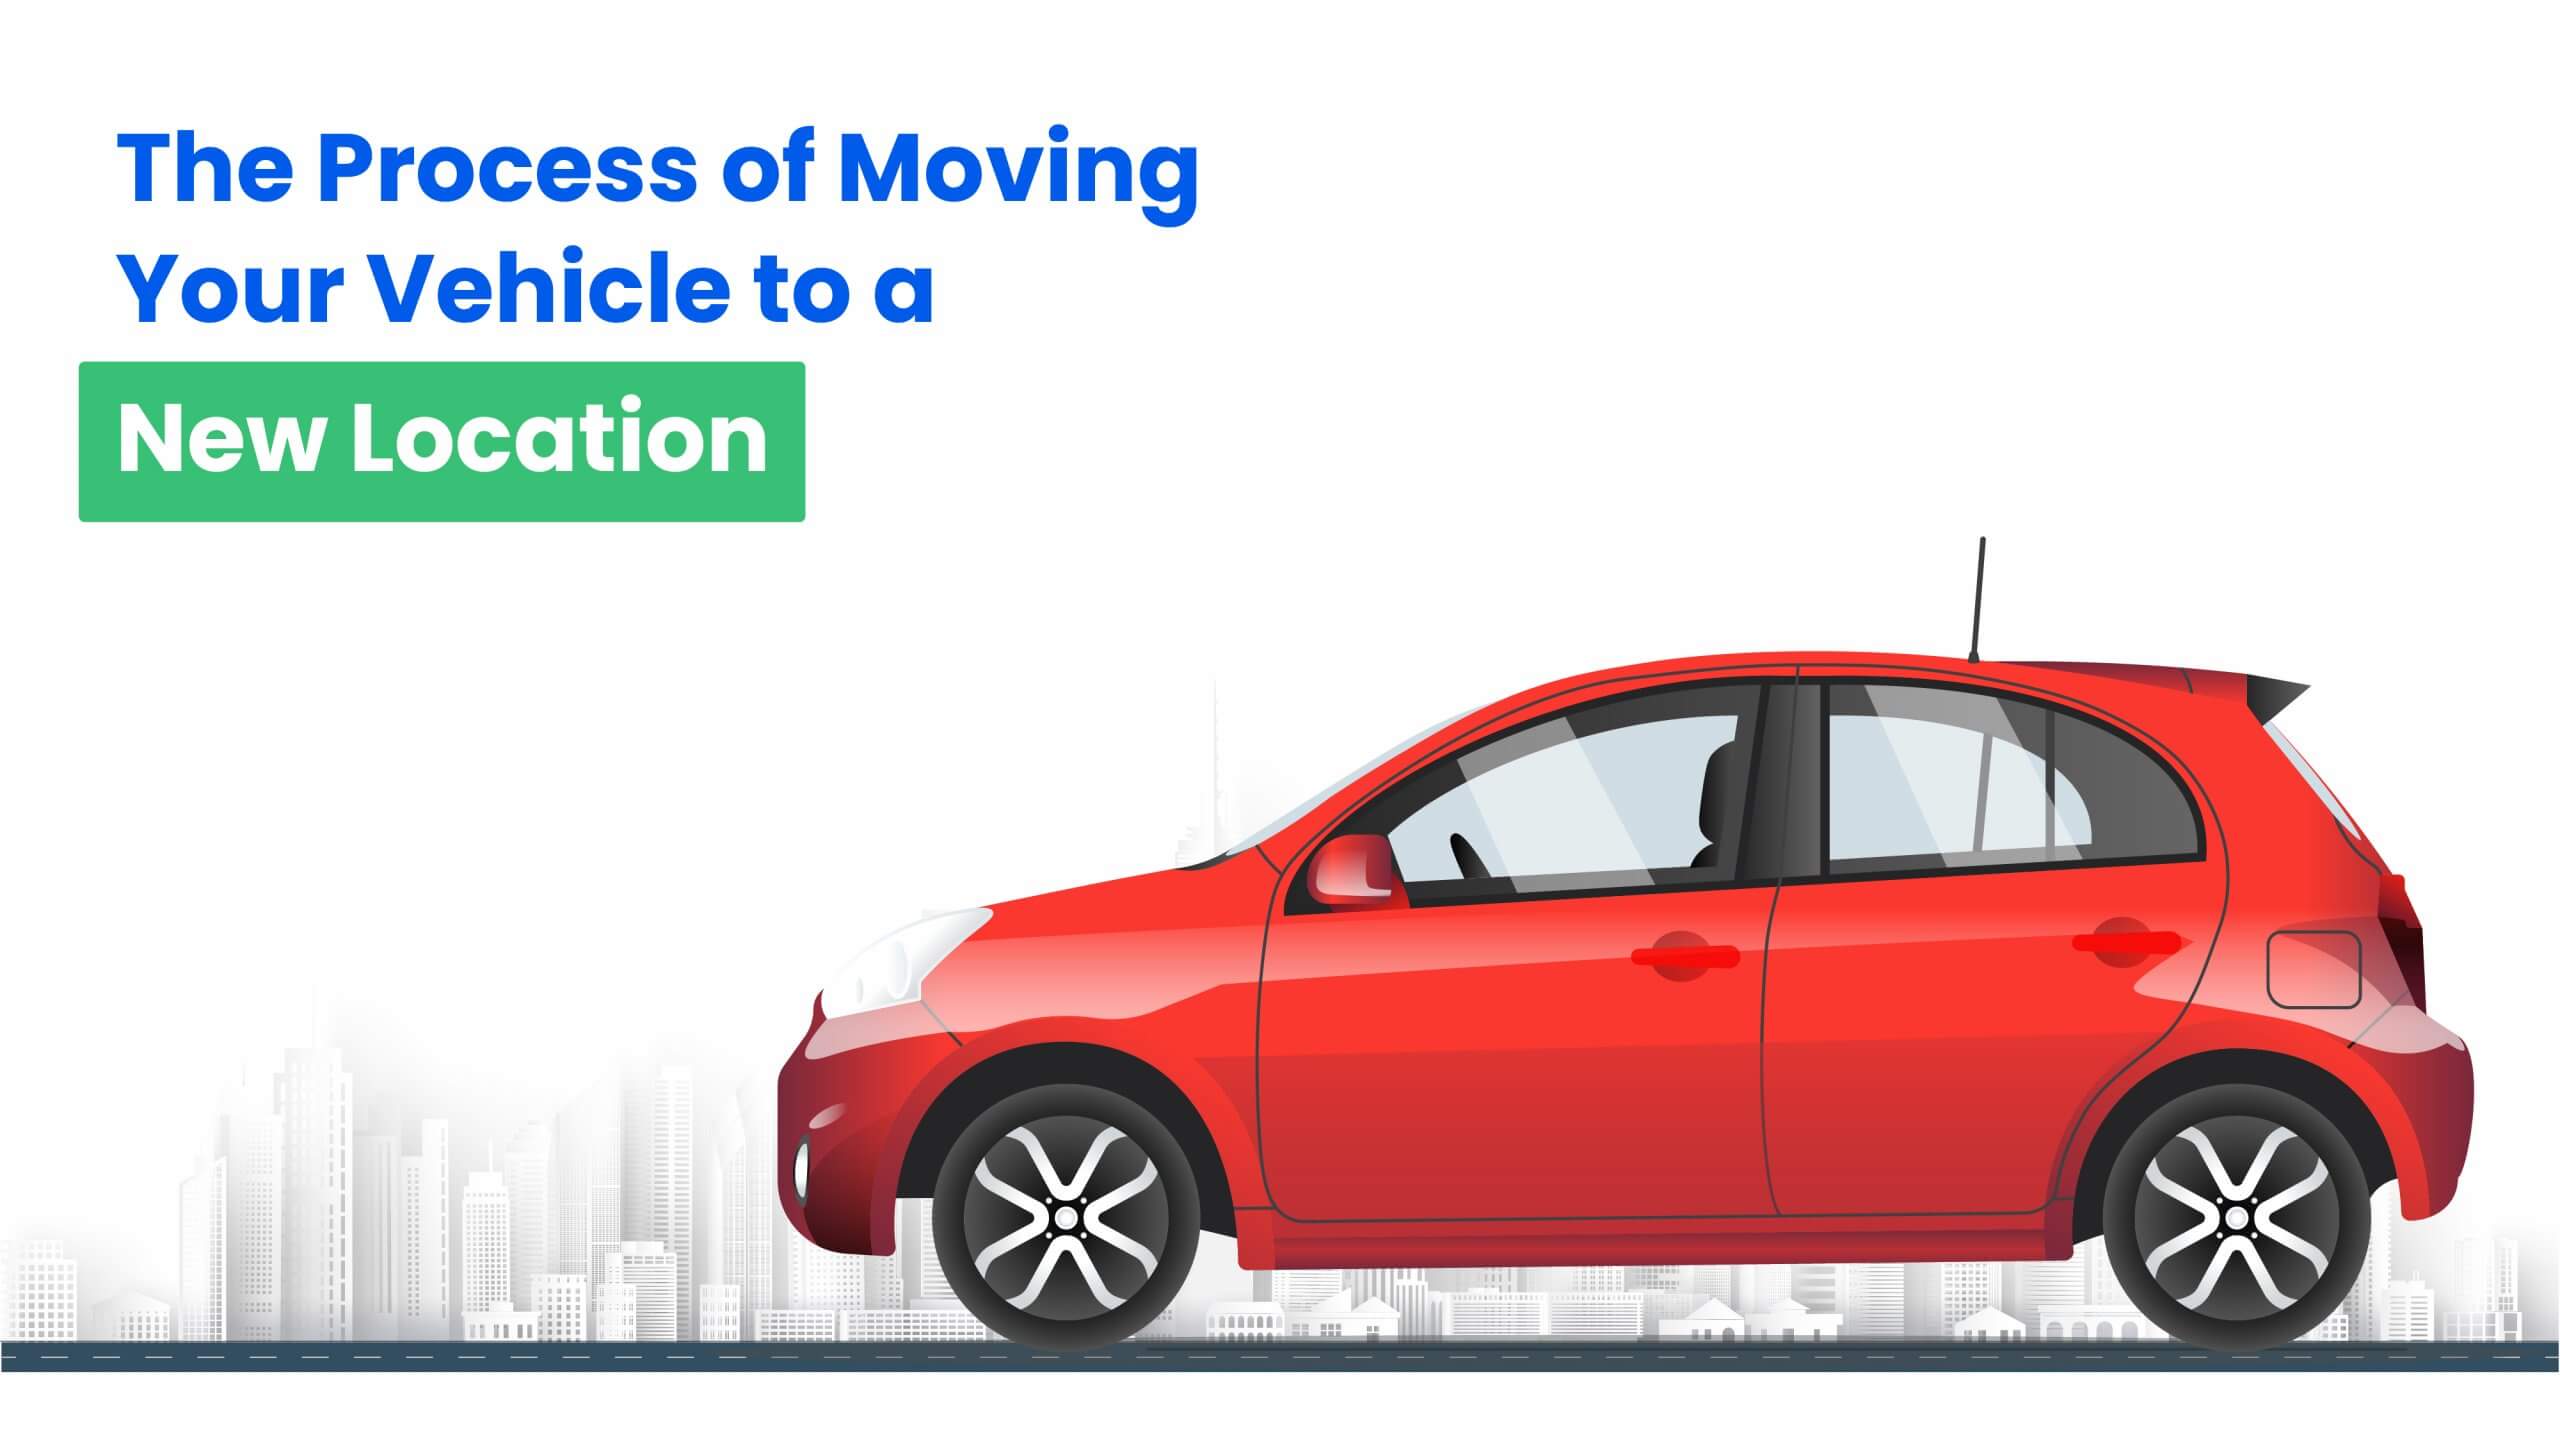 The Process of Moving Your Vehicle to a New Location